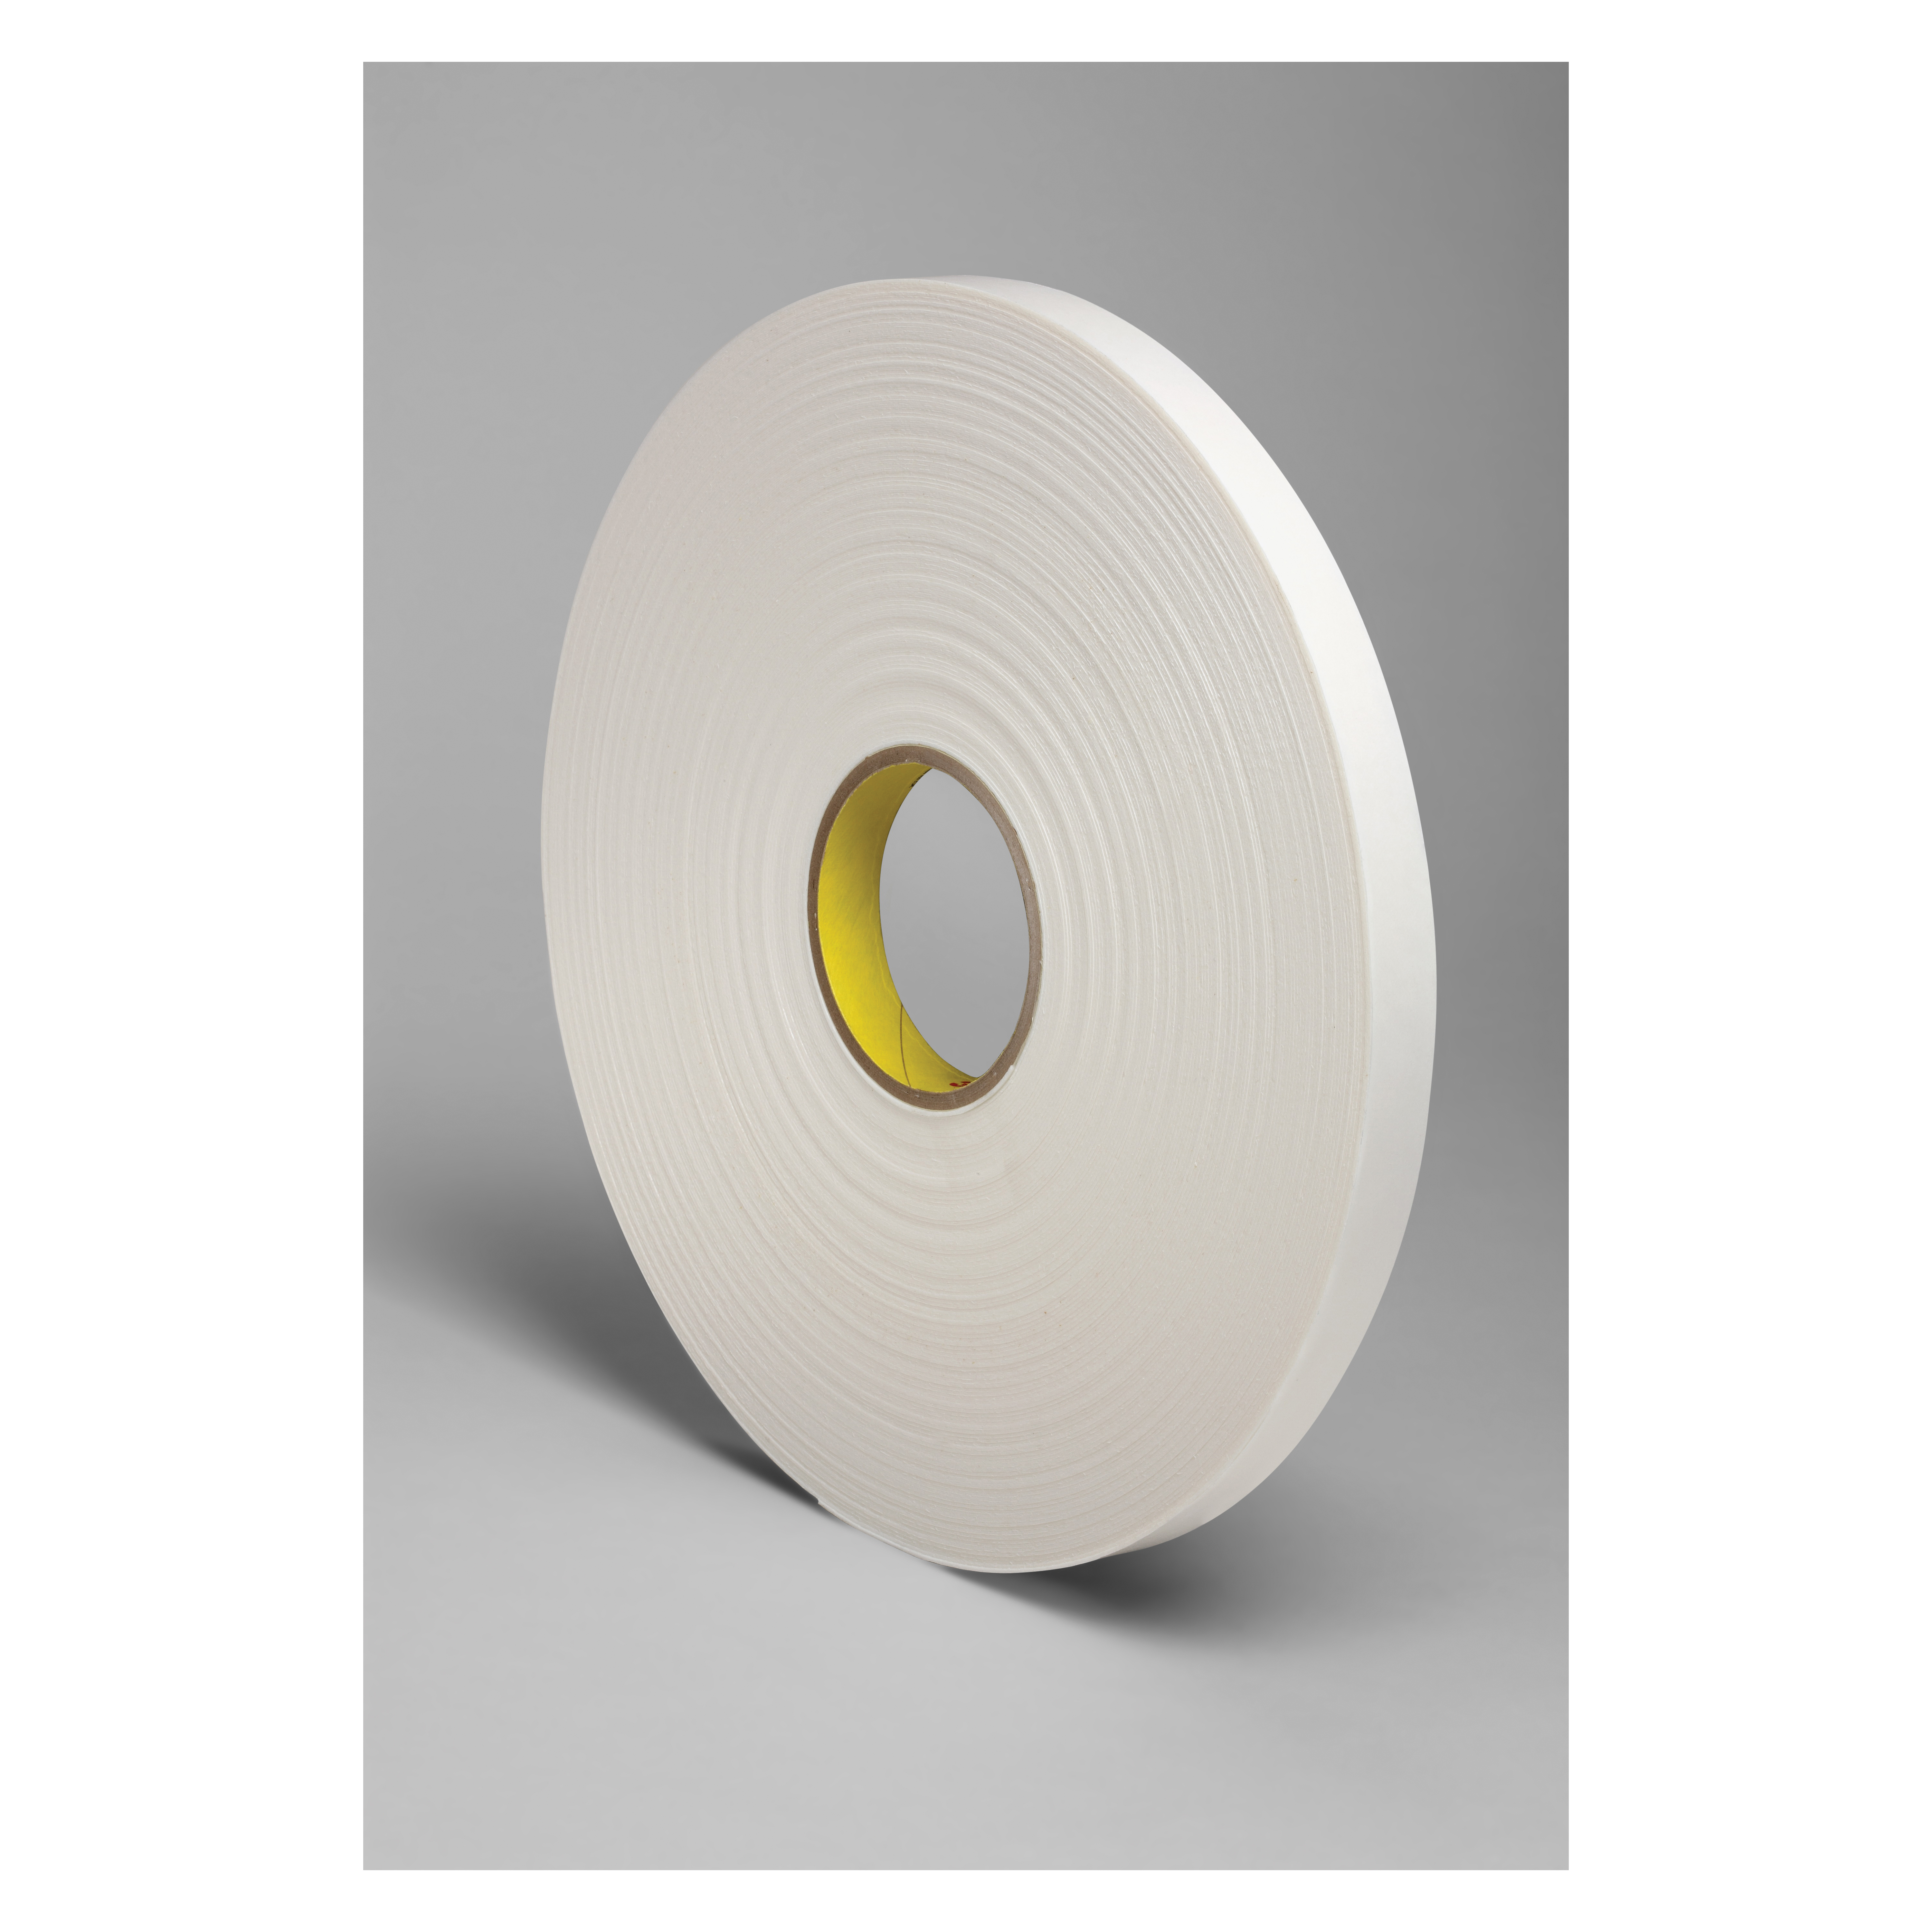 3M™ 021200-67598 Single Coated Foam Tape, 18 yd L x 1/2 in W, 250 mil THK, Acrylic Adhesive, Urethane Foam Backing, Natural